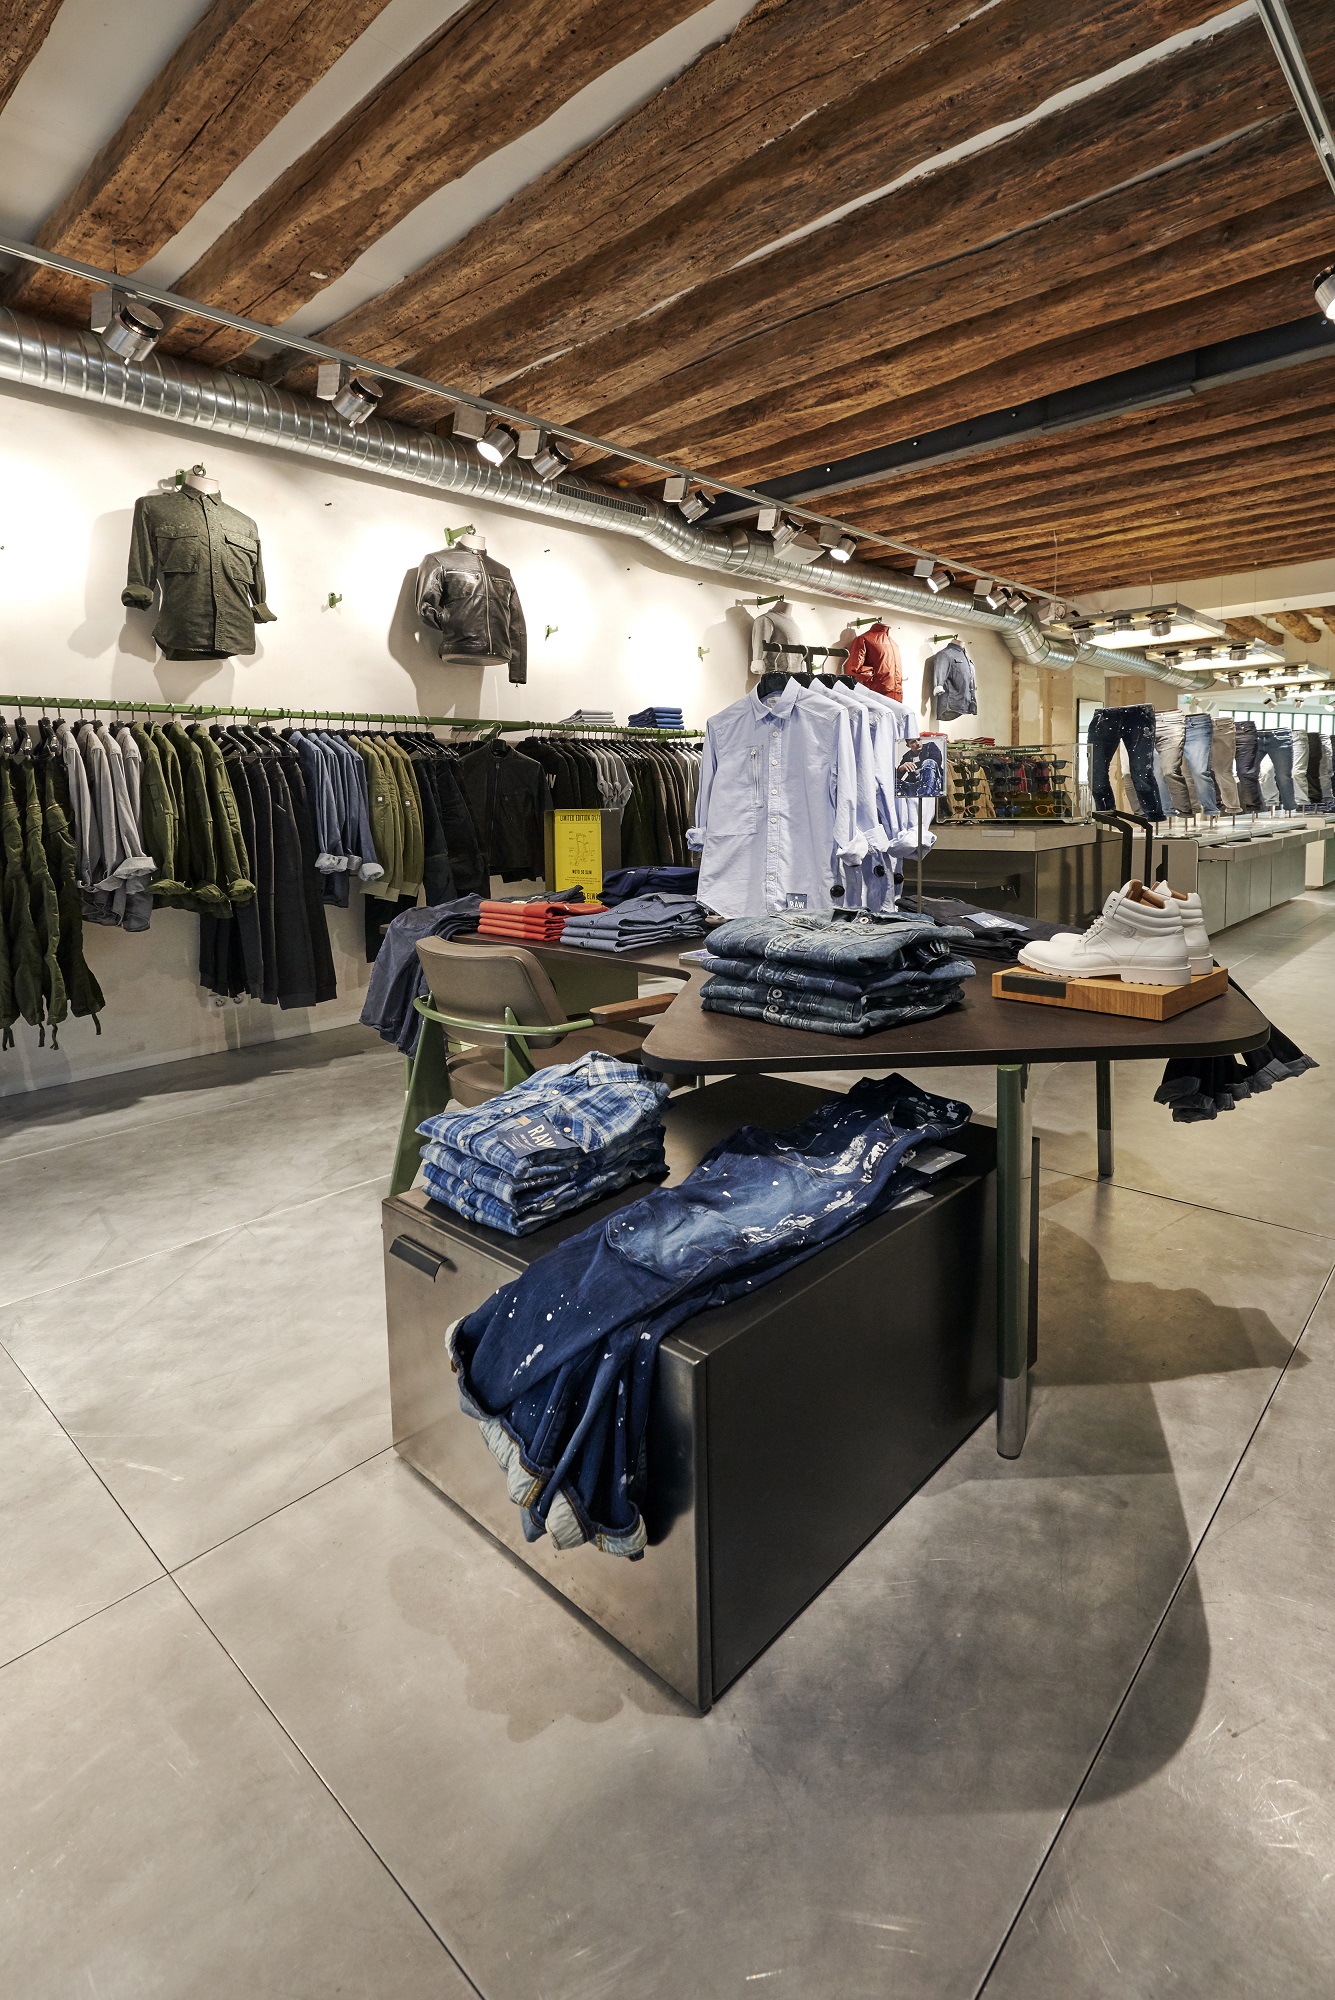 g star raw outlet store